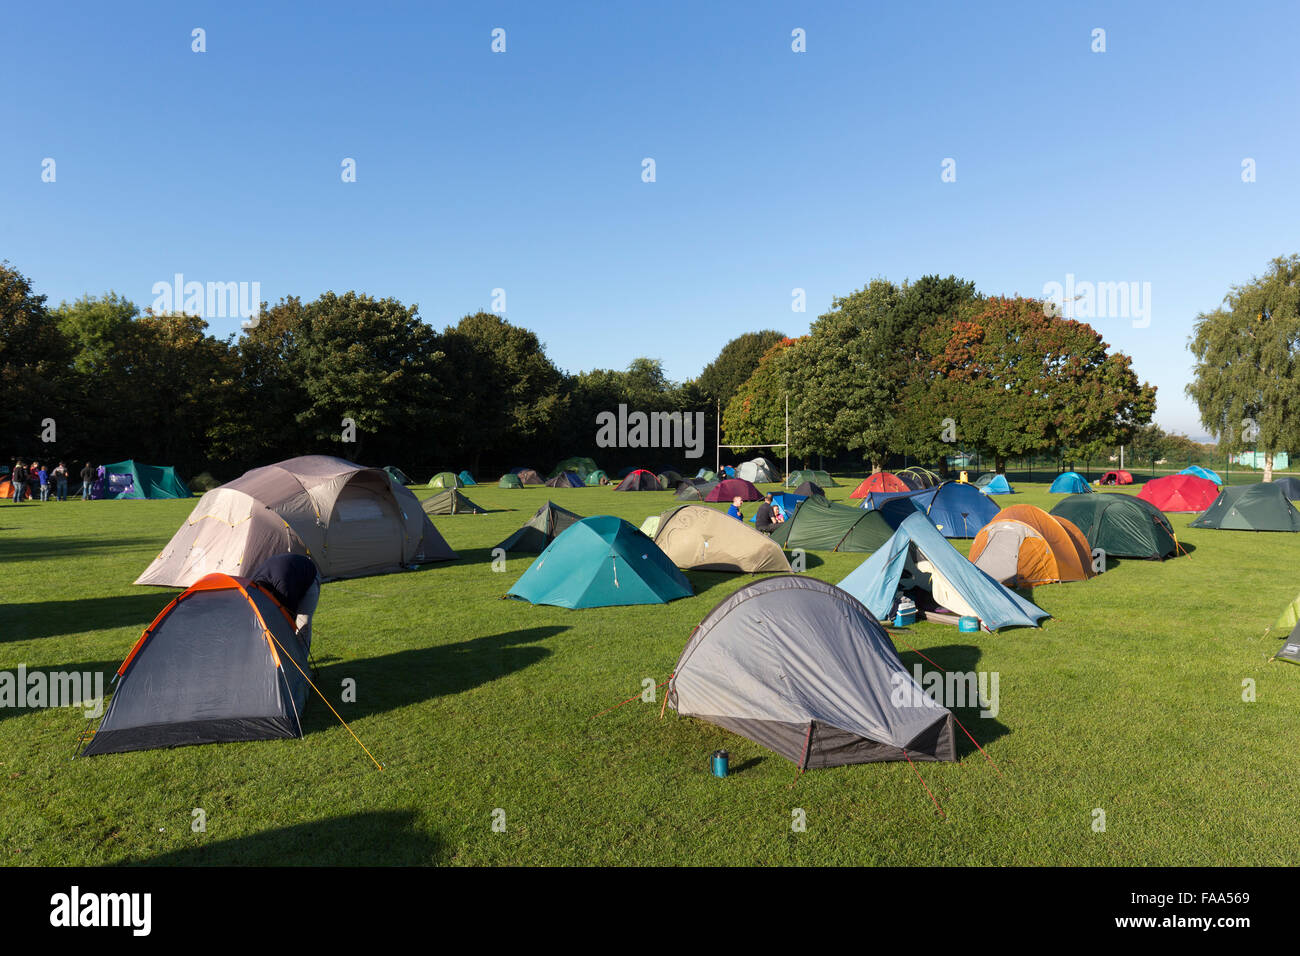 Tents in field, UK Stock Photo